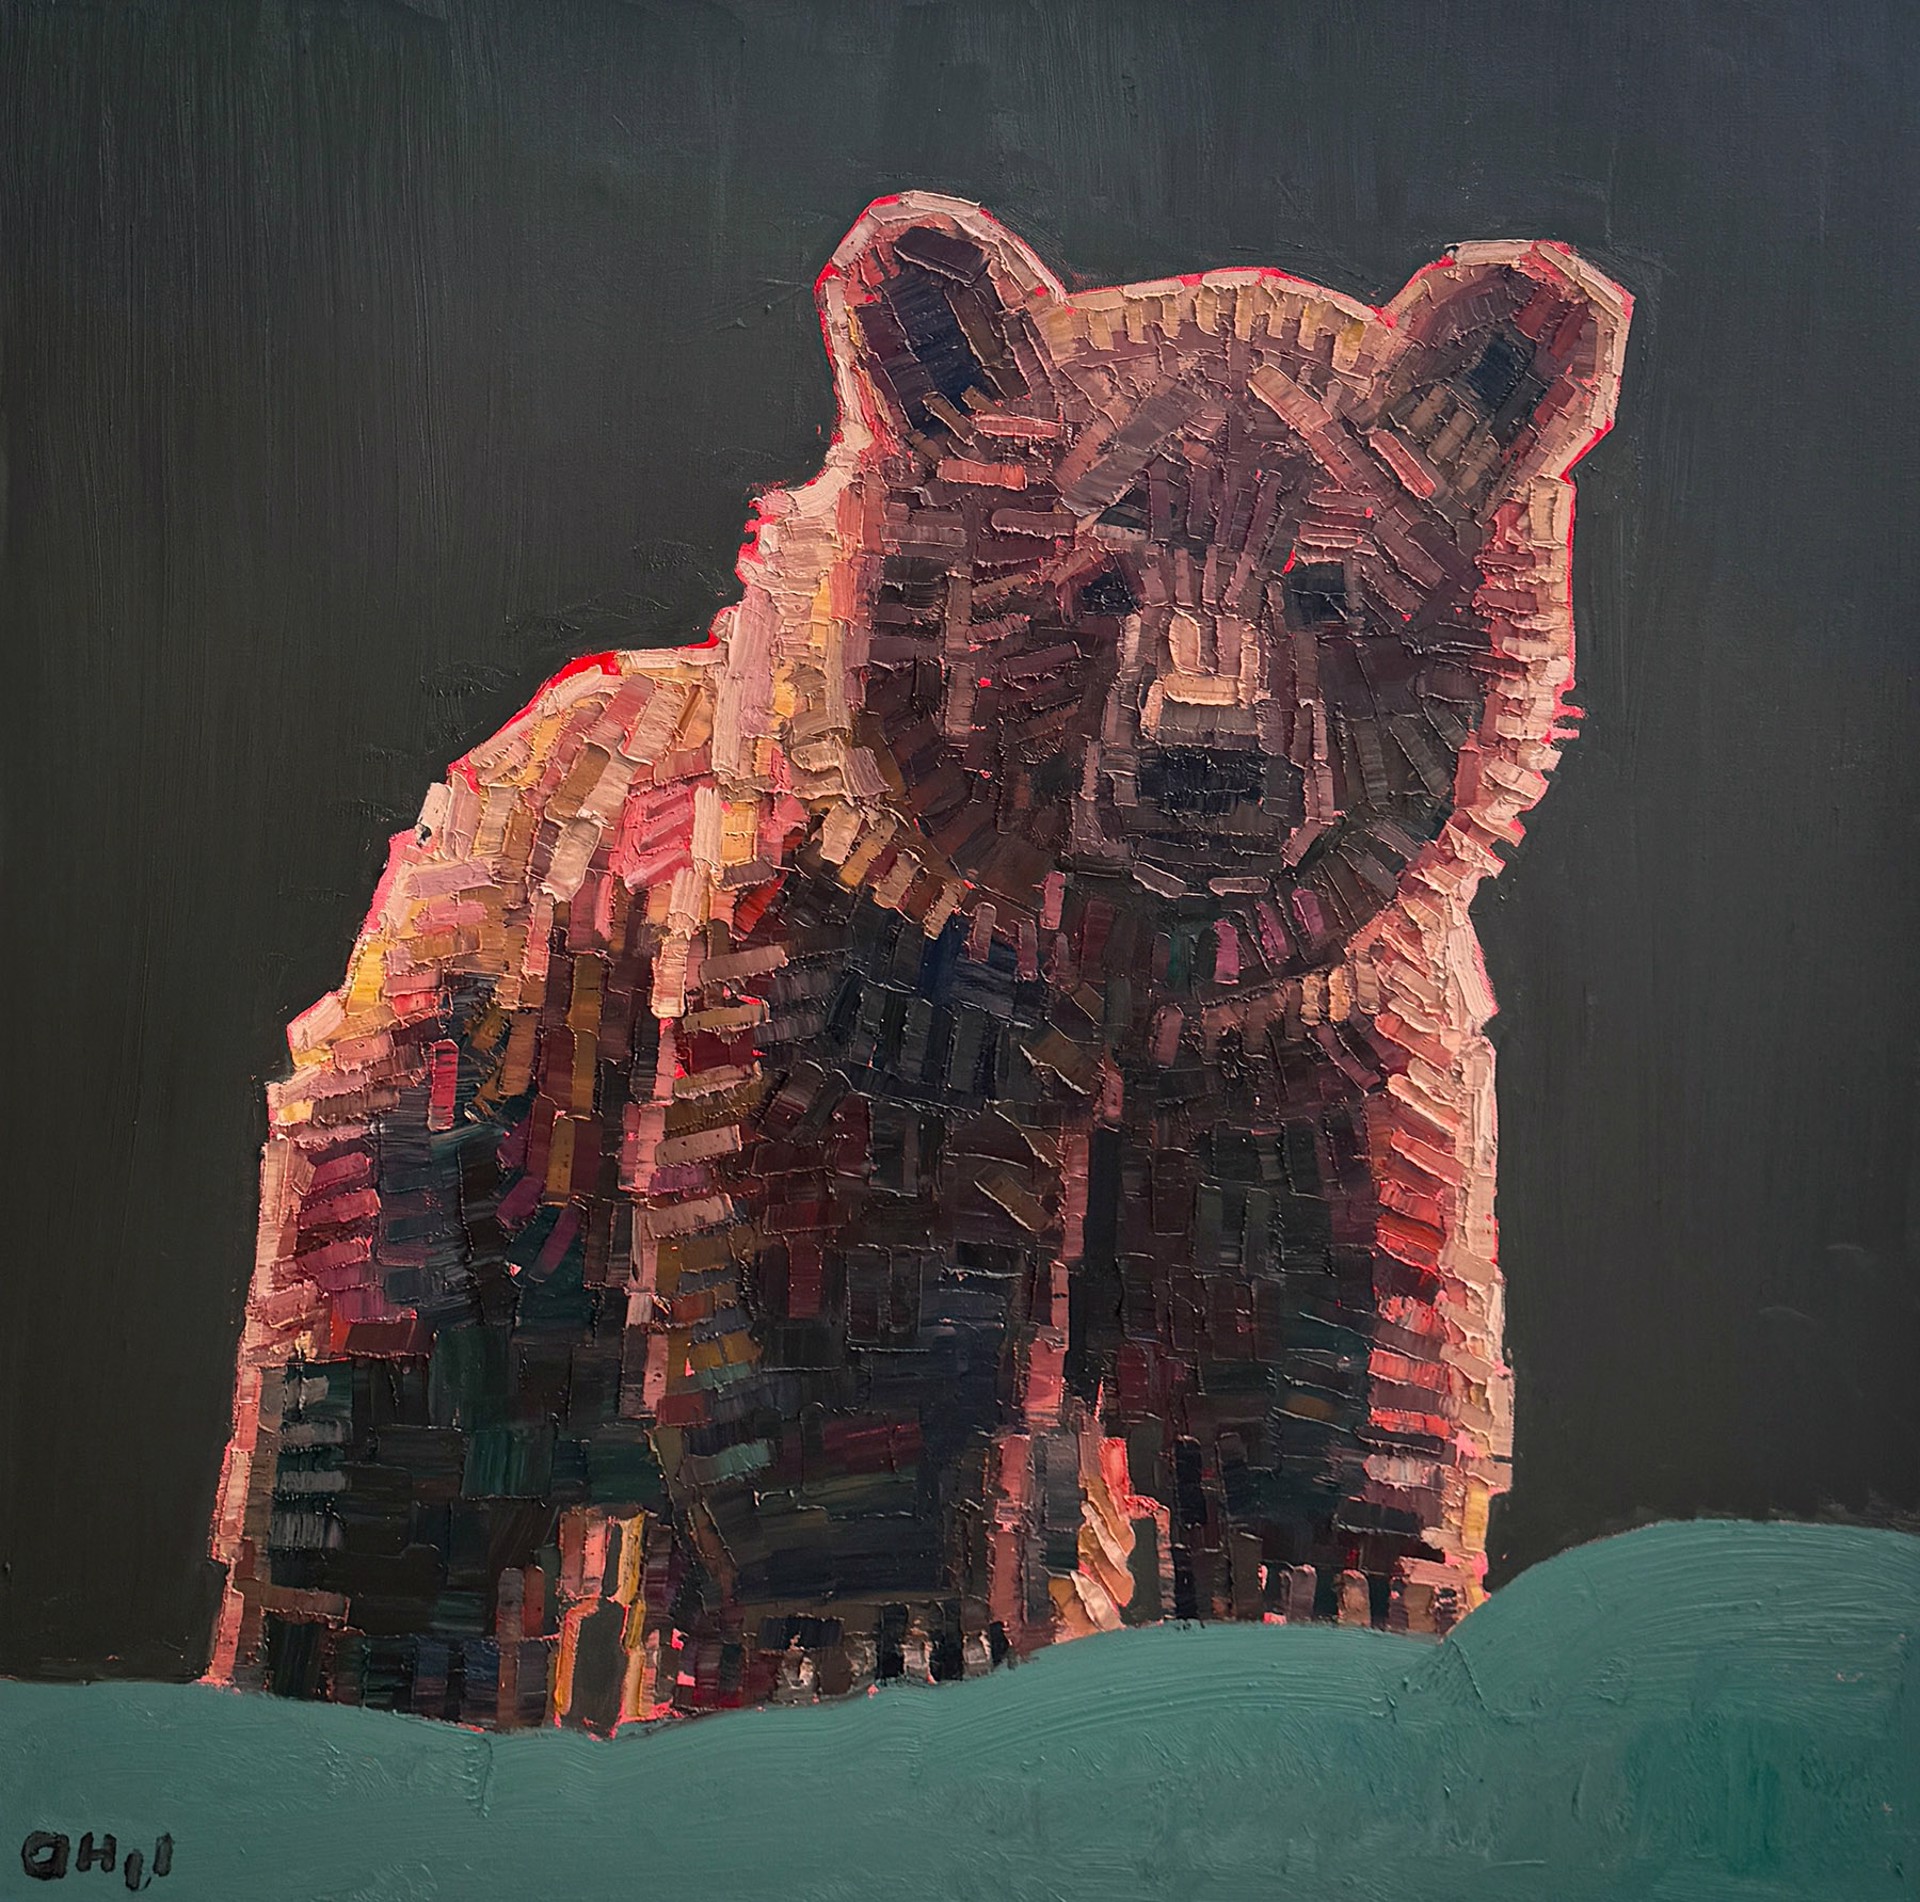 Original Oil Painting By Aaron Hazel Featuring A Grizzly Bear Cub On Dark Green Background